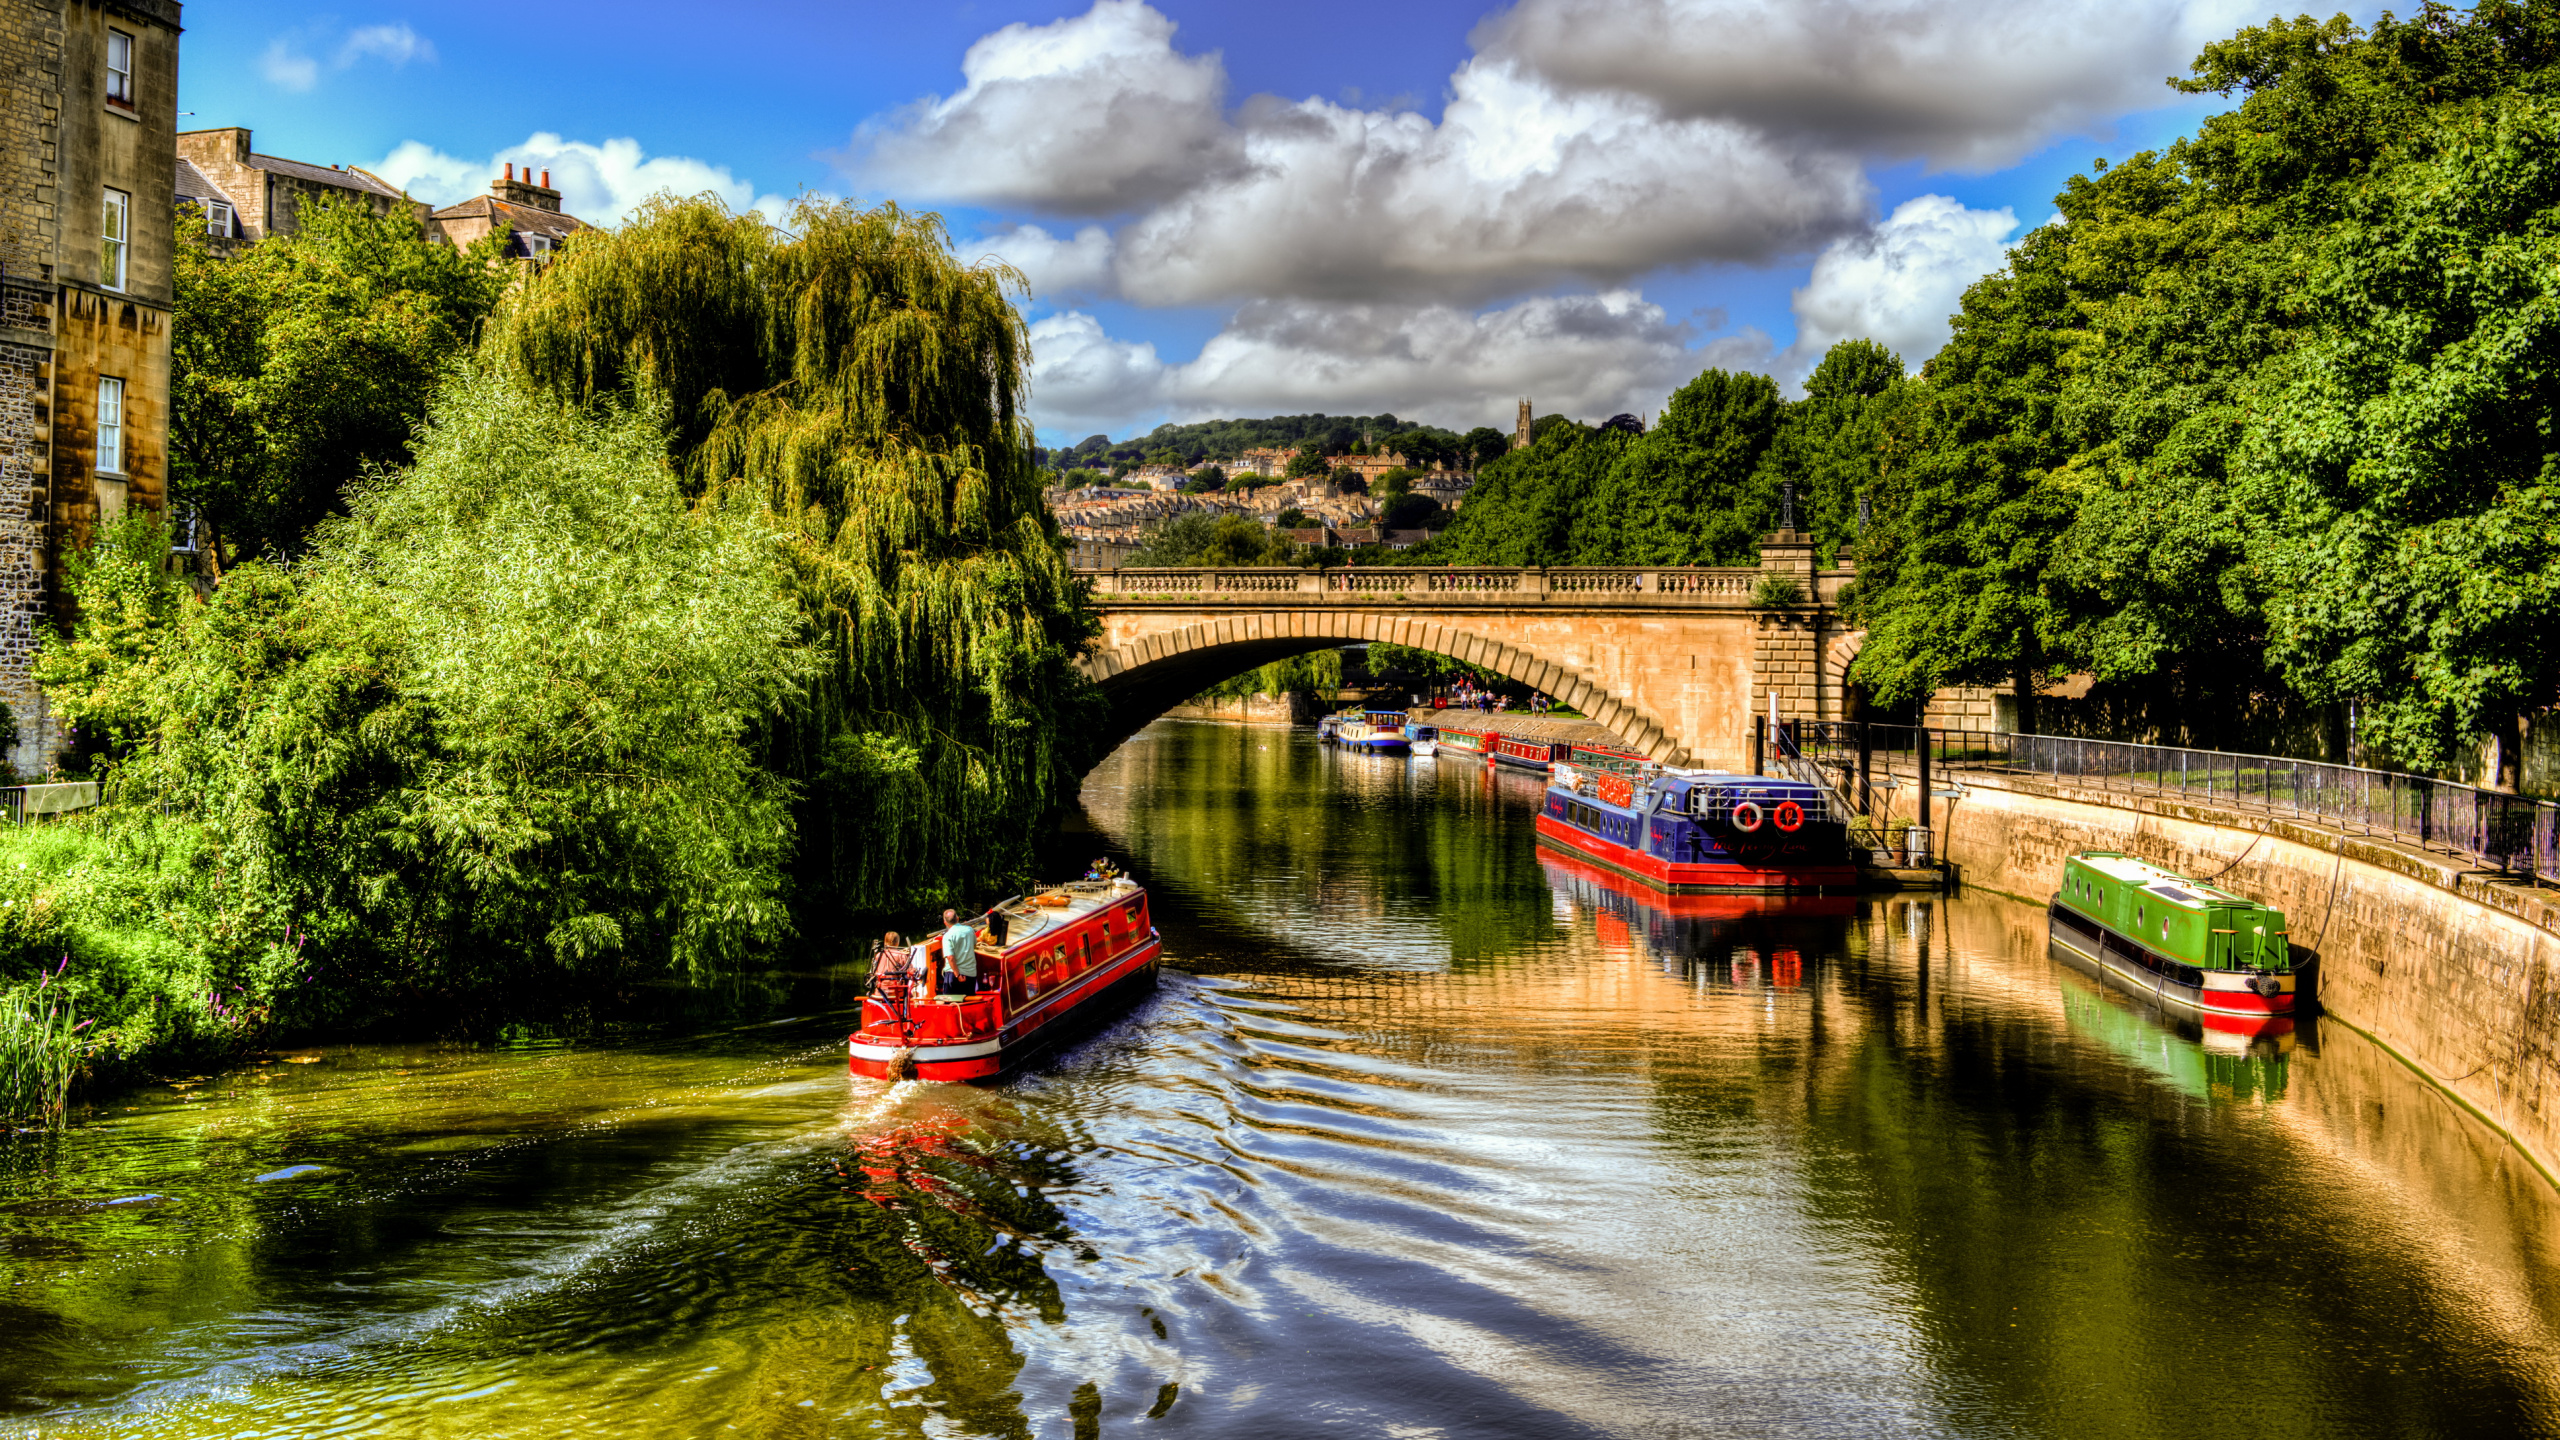 Red Boat on River Near Green Trees Under Blue Sky and White Clouds During Daytime. Wallpaper in 2560x1440 Resolution